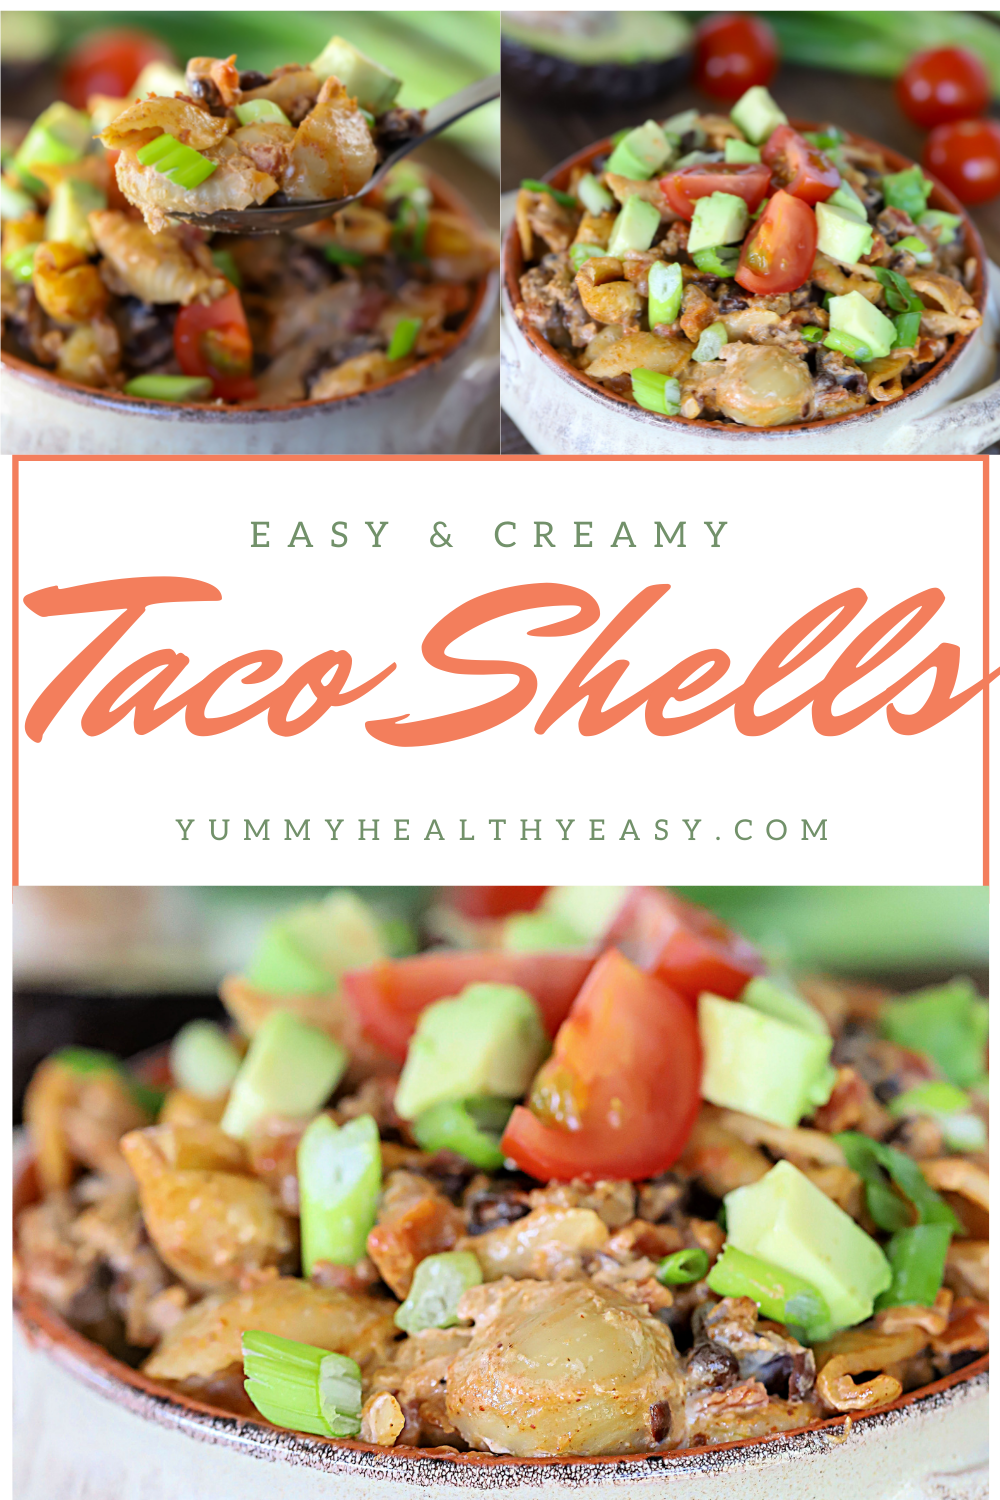 Looking for a change from your regular Taco Tuesday?  Check out these creamy taco shells!  It's a quick 30-minute meal that's all cooked in one pan — ground turkey, black beans, taco seasoning, and whole grain husks combine for a hearty, healthy, and delicious weeknight dinner!  via @jennikolaus